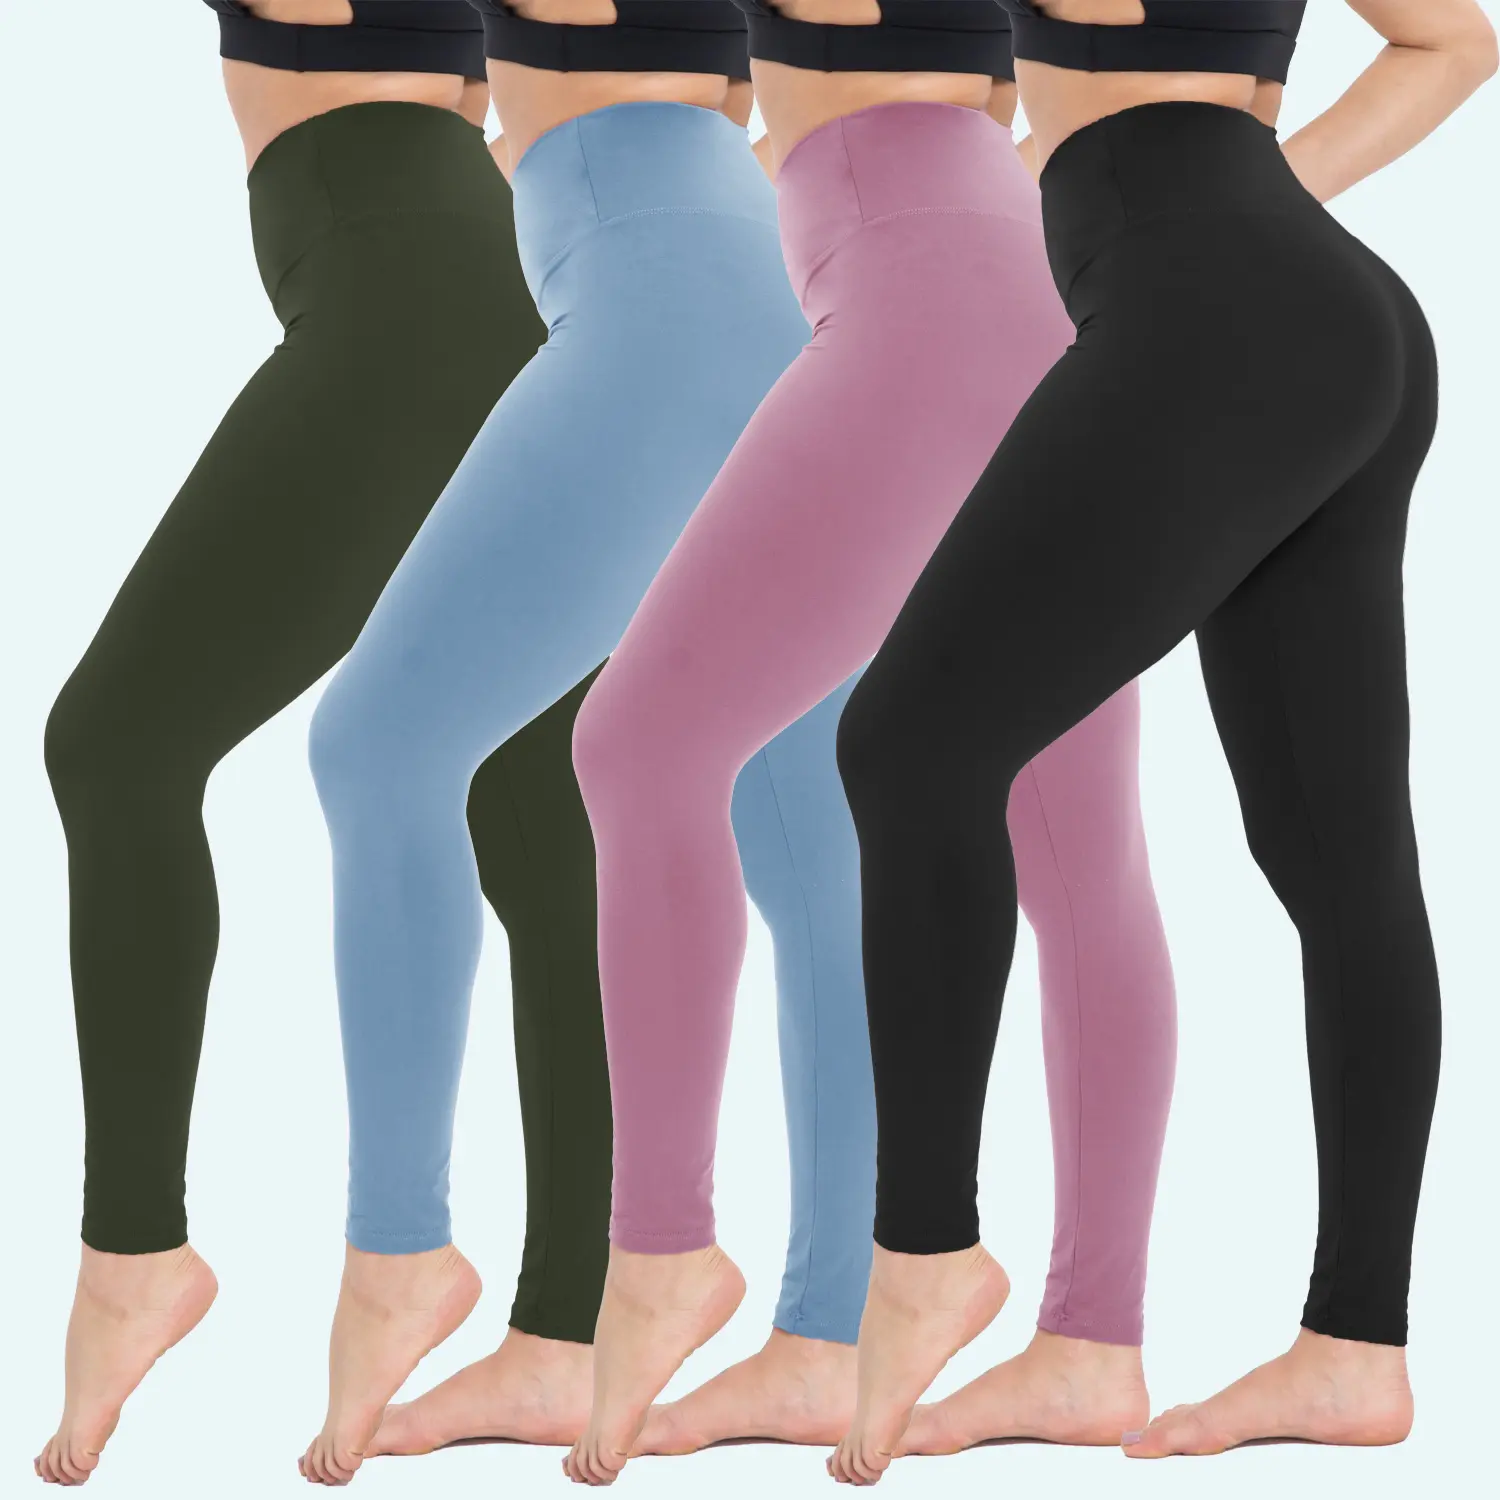 Wholesale Custom Logo 23 Colors High Waisted Workout Tights Pants Super Soft Stretchy Gym Fitness Leggings for Women